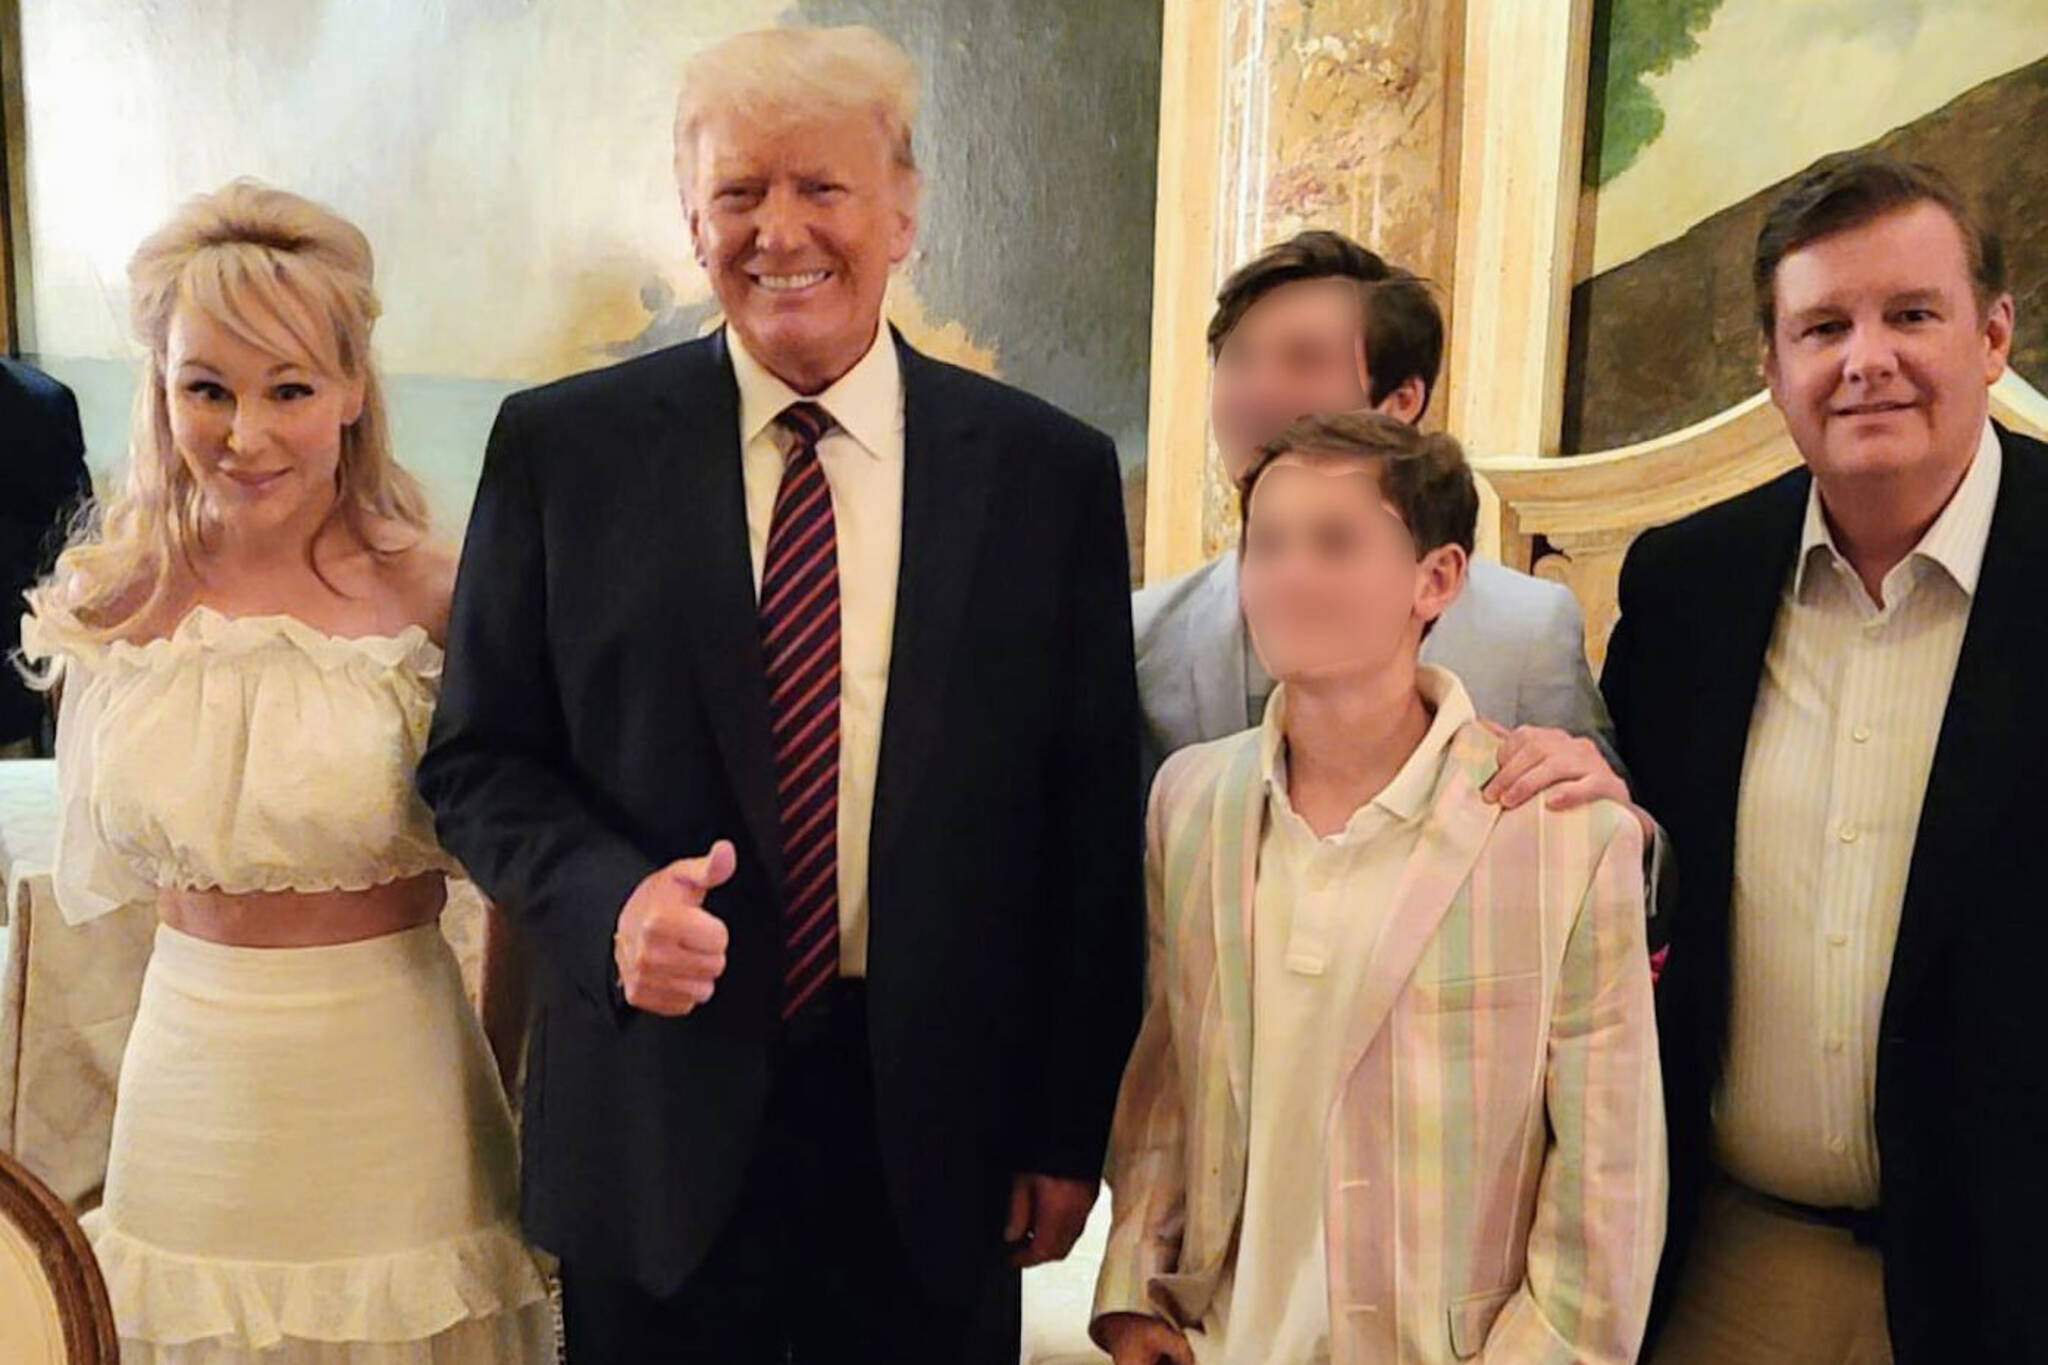 Some of Toronto's wealthiest families were in Mar-a-Lago with Trump this  weekend